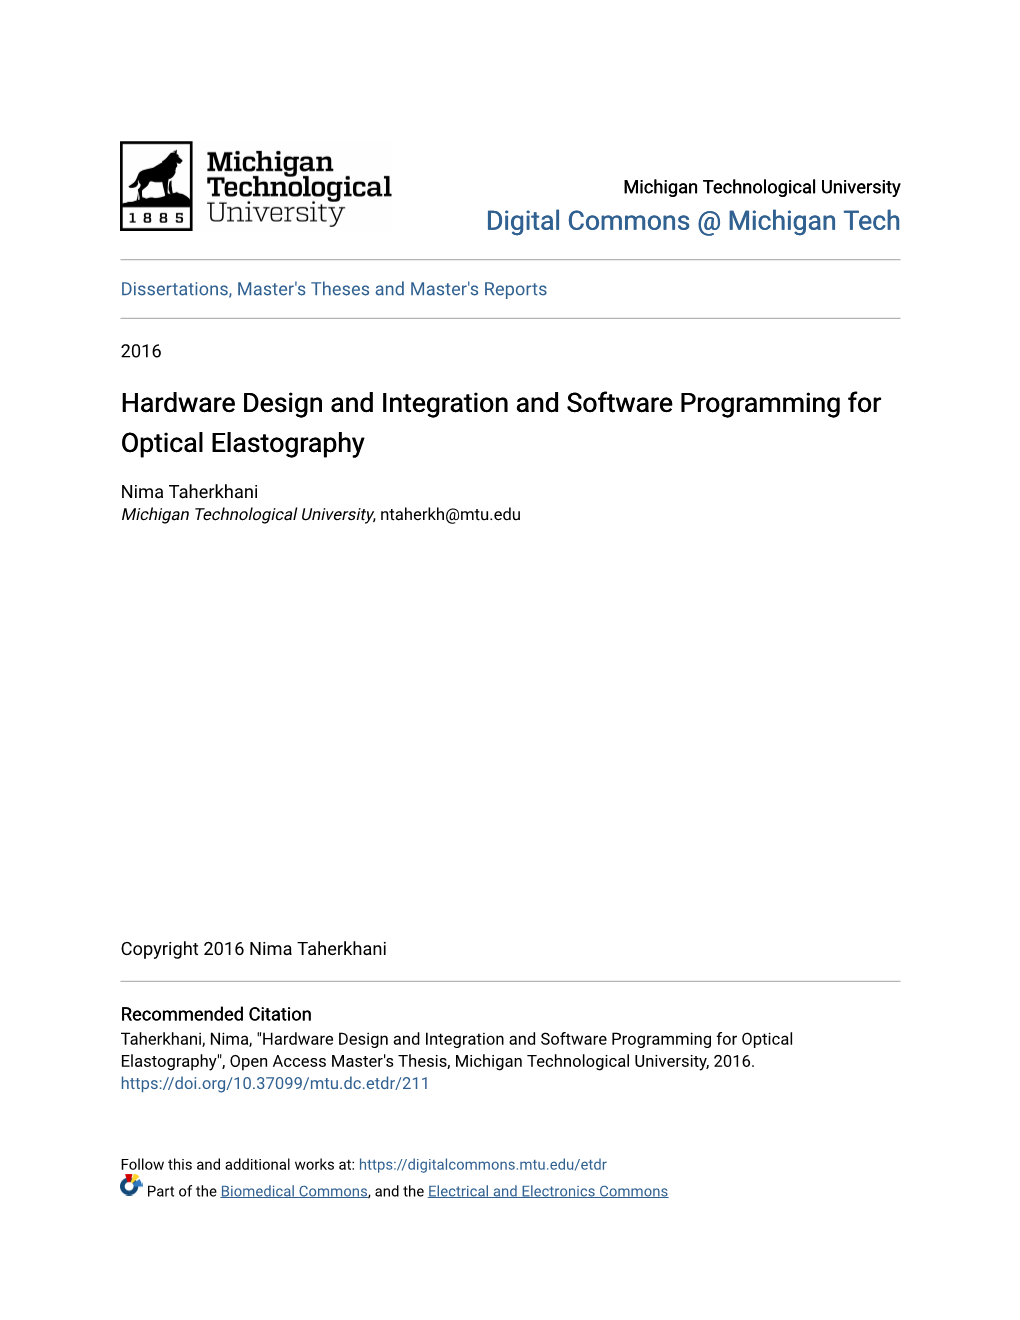 Hardware Design and Integration and Software Programming for Optical Elastography